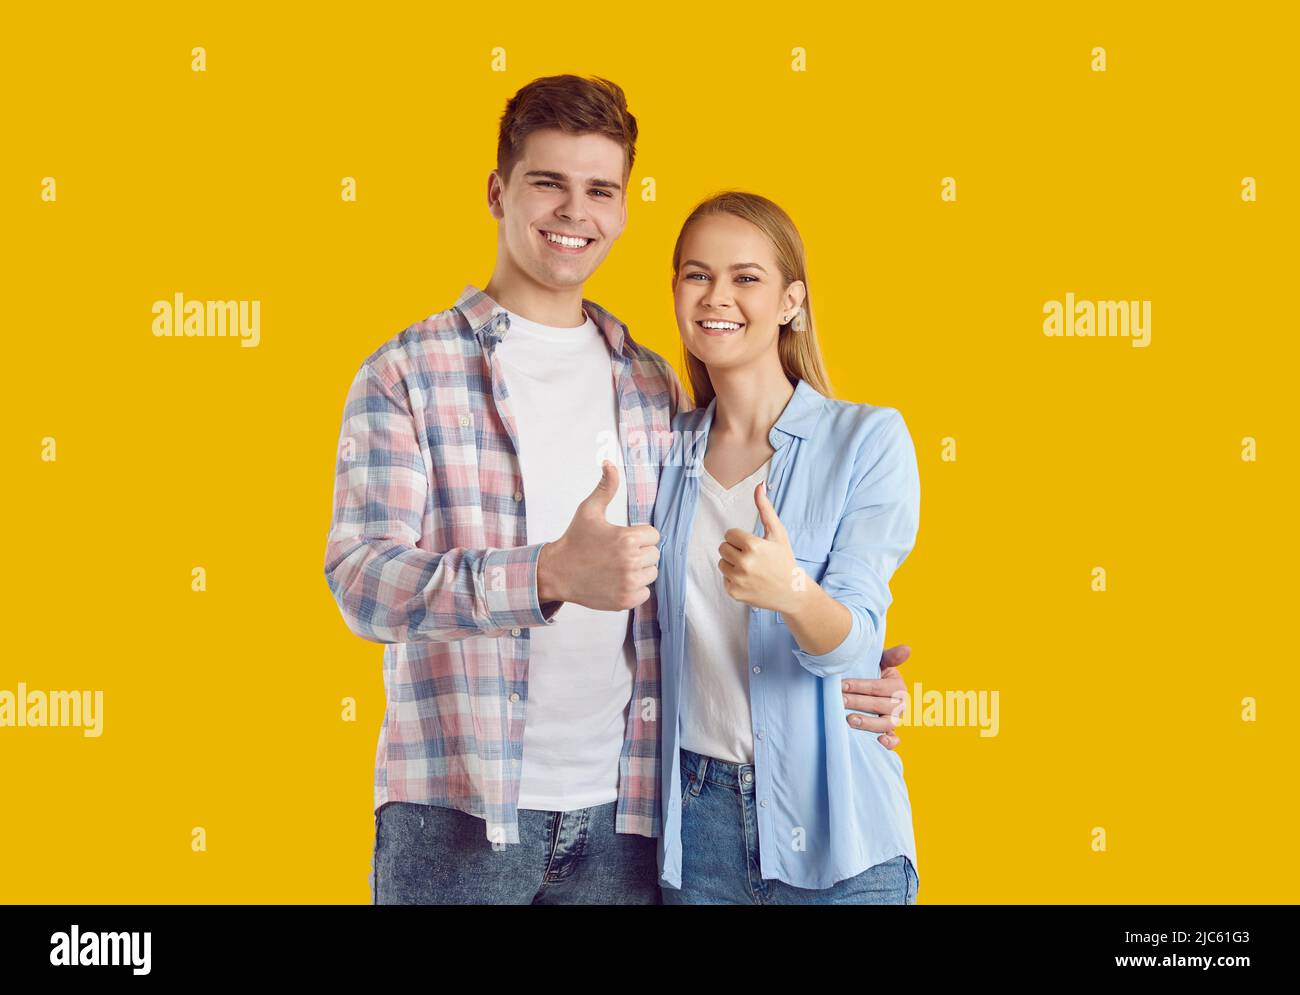 Portrait of happy satisfied young man and woman smiling and giving thumbs up together Stock Photo